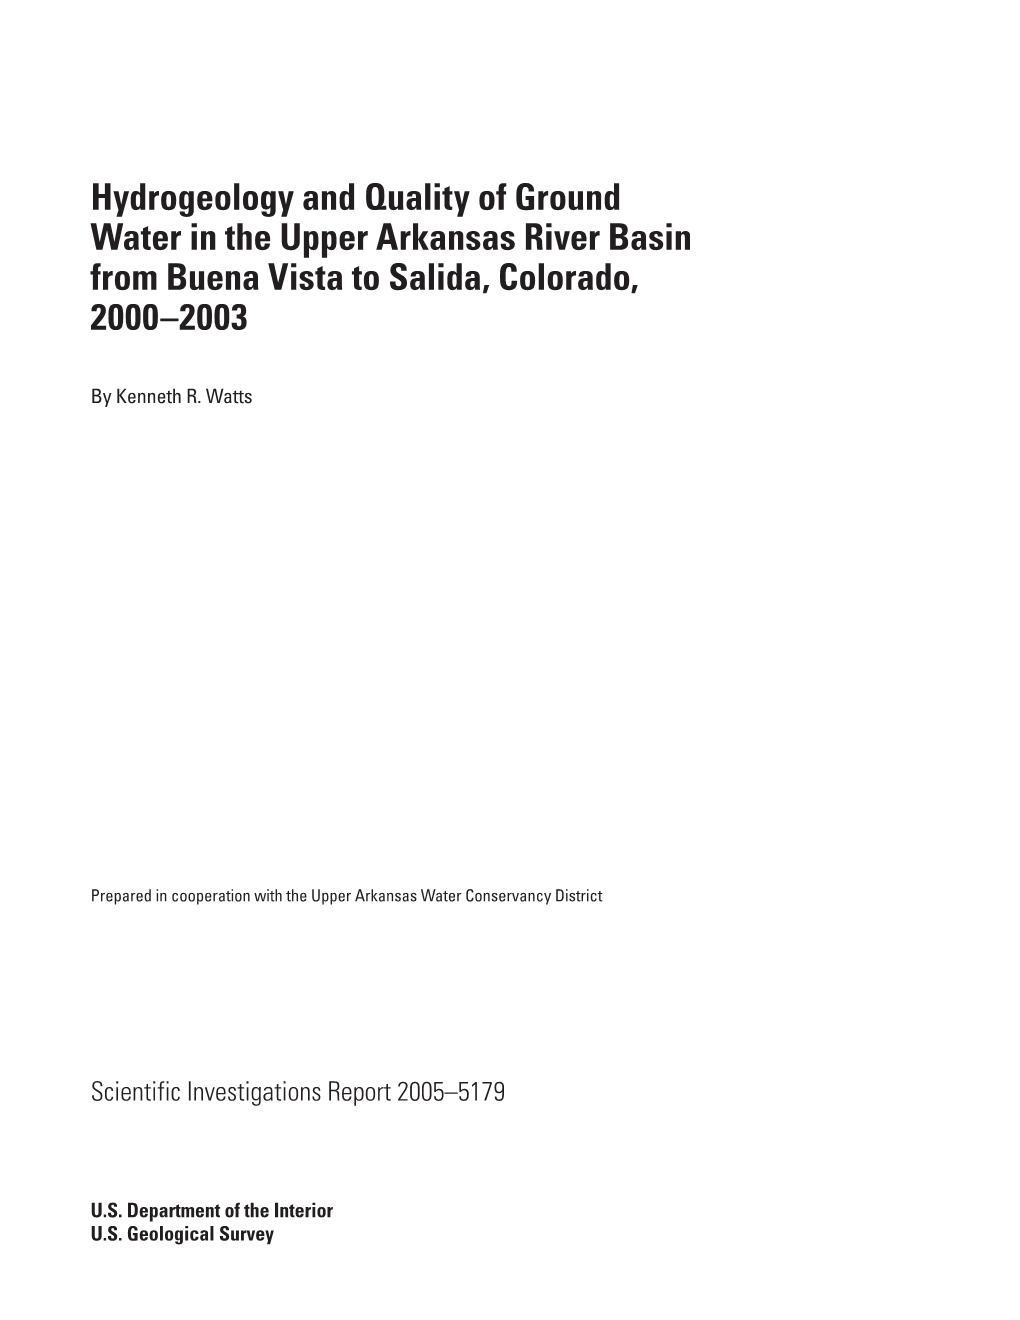 Hydrogeology and Quality of Ground Water in the Upper Arkansas River Basin from Buena Vista to Salida, Colorado, 2000–2003